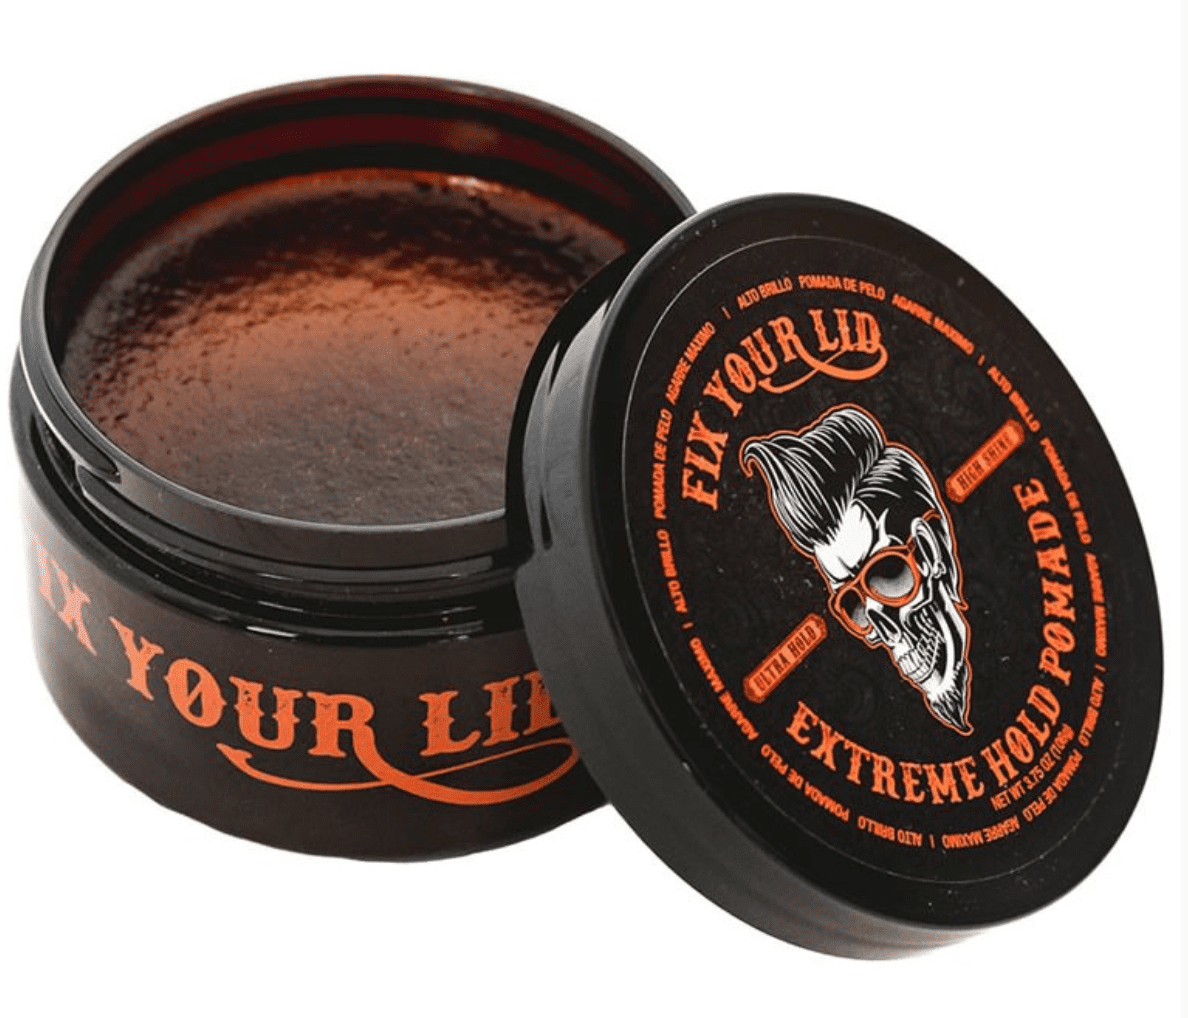 Fix Your Lid Extreme Hold Pomade - 3.75 oz